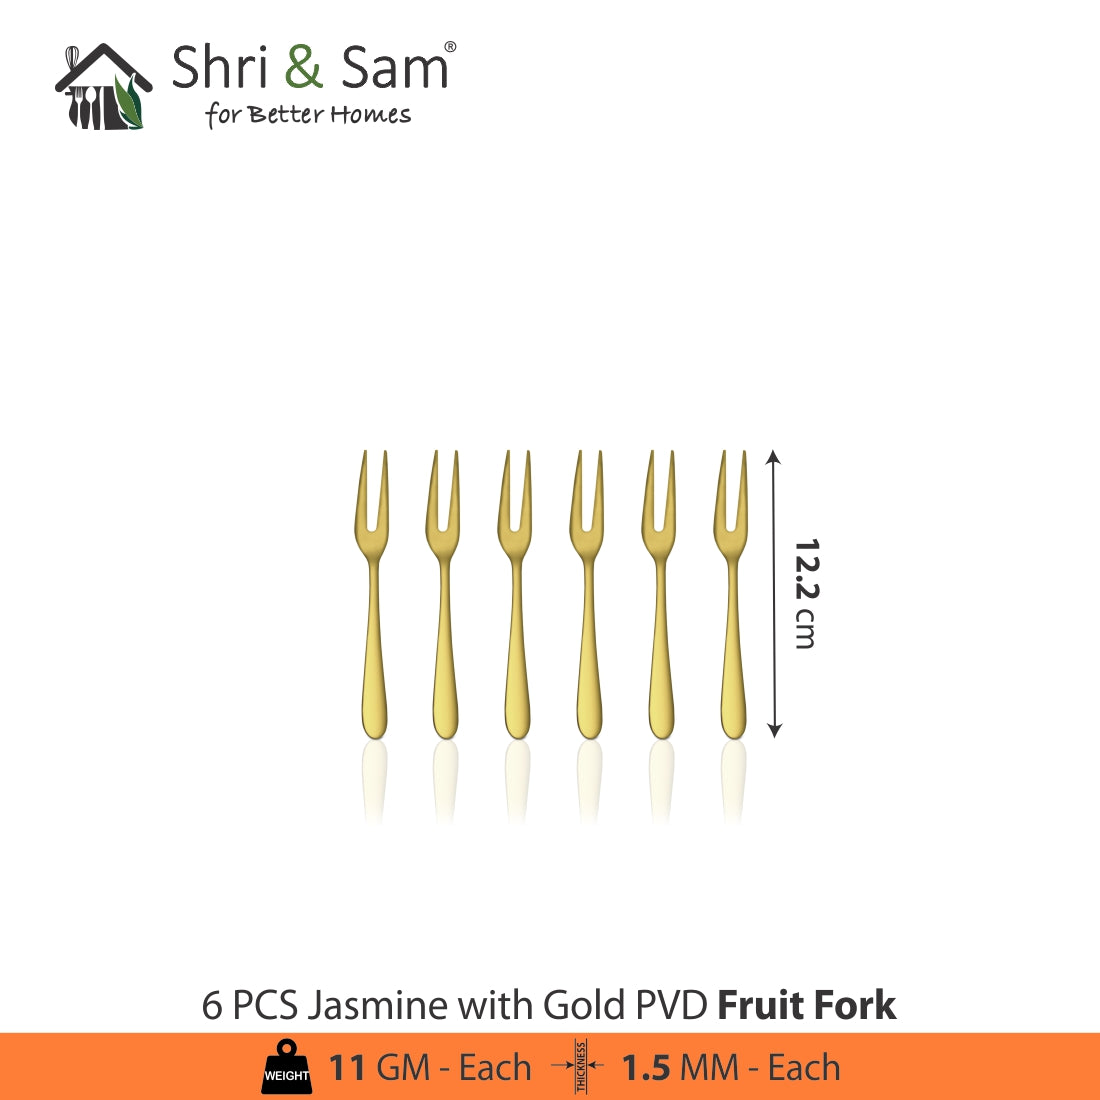 Stainless Steel Cutlery with Gold PVD Coating Jasmine